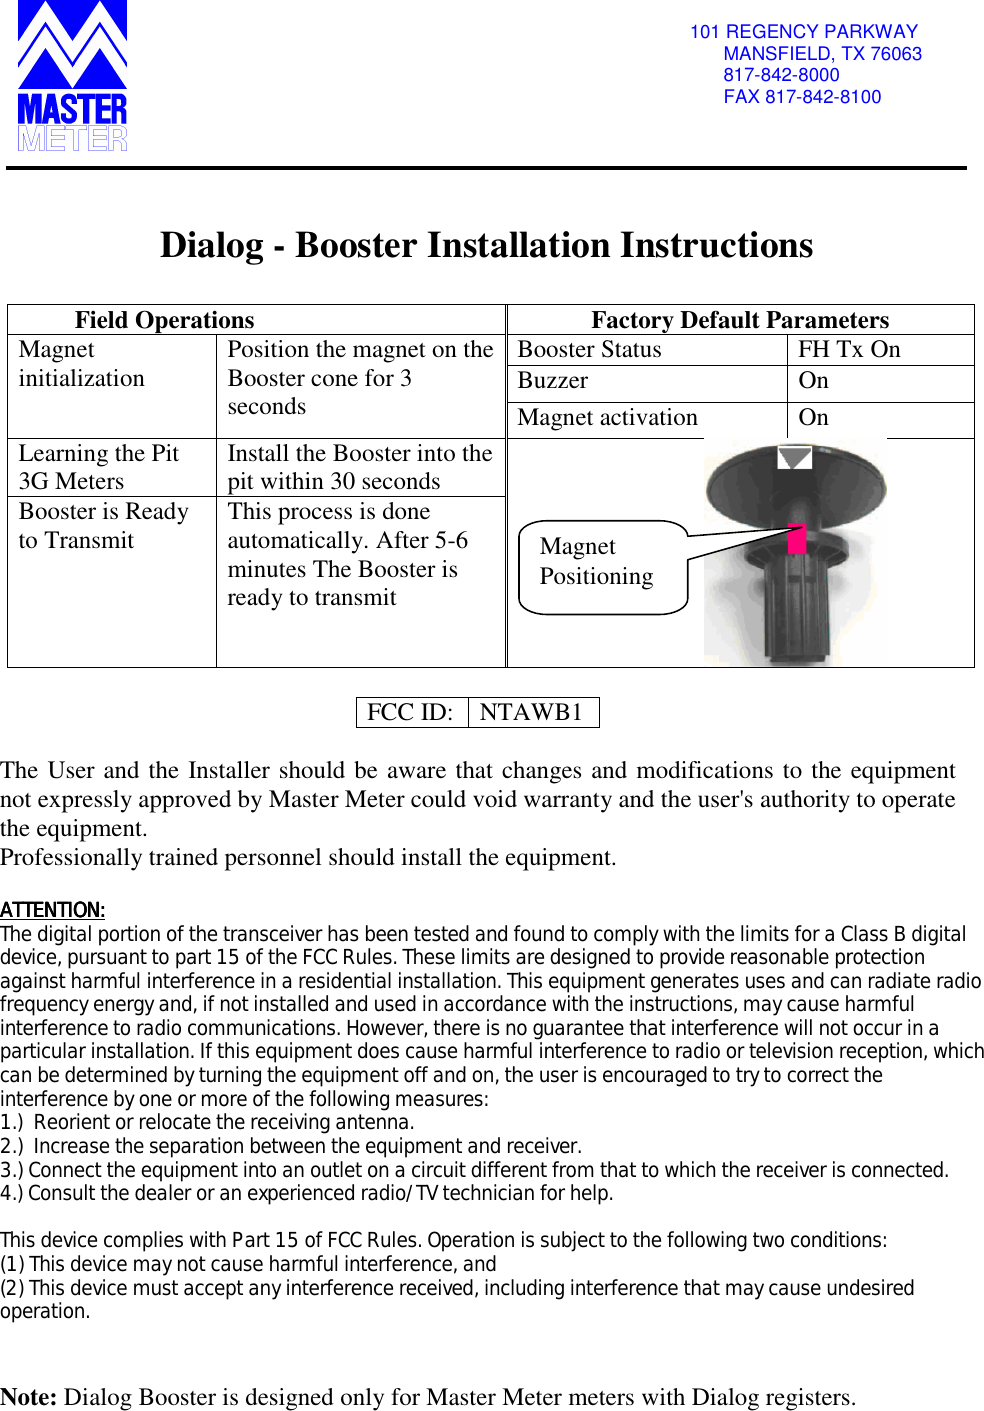                                                    101 REGENCY PARKWAY MANSFIELD, TX 76063 817-842-8000 FAX 817-842-8100    Dialog - Booster Installation Instructions  Field Operations  Factory Default Parameters Booster Status  FH Tx On Buzzer On Magnet initialization  Position the magnet on the Booster cone for 3 seconds  Magnet activation  On Learning the Pit 3G Meters  Install the Booster into the pit within 30 seconds Booster is Ready to Transmit  This process is done automatically. After 5-6 minutes The Booster is ready to transmit                                  FCC ID: NTAWB1  The User and the Installer should be aware that changes and modifications to the equipment not expressly approved by Master Meter could void warranty and the user&apos;s authority to operate the equipment.  Professionally trained personnel should install the equipment.  ATTENTION:ATTENTION:ATTENTION:ATTENTION:    The digital portion of the transceiver has been tested and found to comply with the limits for a Class B digital device, pursuant to part 15 of the FCC Rules. These limits are designed to provide reasonable protection against harmful interference in a residential installation. This equipment generates uses and can radiate radio frequency energy and, if not installed and used in accordance with the instructions, may cause harmful interference to radio communications. However, there is no guarantee that interference will not occur in a particular installation. If this equipment does cause harmful interference to radio or television reception, which can be determined by turning the equipment off and on, the user is encouraged to try to correct the interference by one or more of the following measures:  1.)  Reorient or relocate the receiving antenna. 2.)  Increase the separation between the equipment and receiver. 3.) Connect the equipment into an outlet on a circuit different from that to which the receiver is connected. 4.) Consult the dealer or an experienced radio/TV technician for help.  This device complies with Part 15 of FCC Rules. Operation is subject to the following two conditions: (1) This device may not cause harmful interference, and (2) This device must accept any interference received, including interference that may cause undesired operation.   Note: Dialog Booster is designed only for Master Meter meters with Dialog registers. Magnet Positioning 